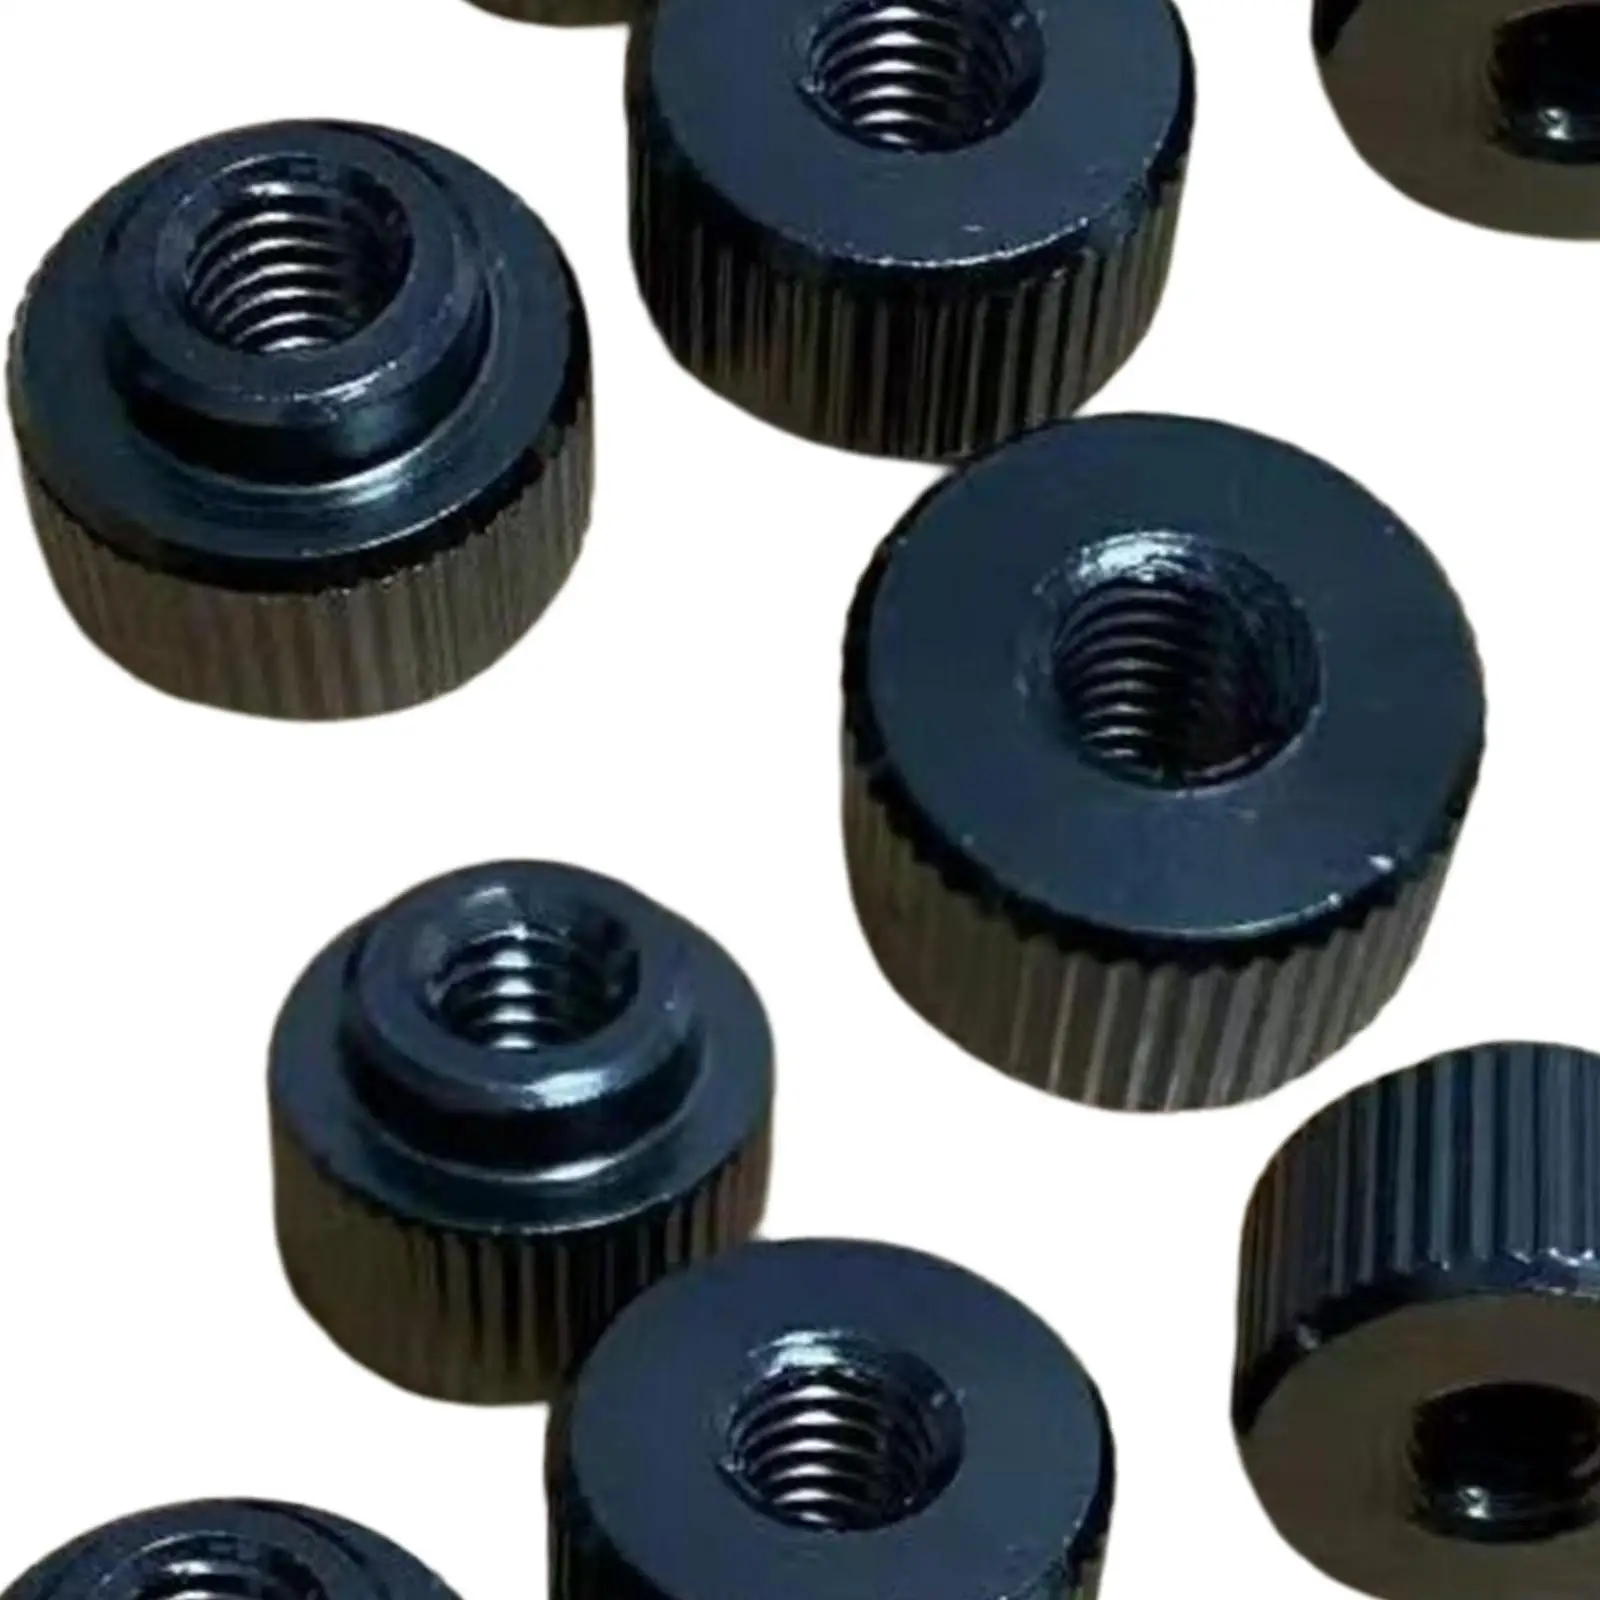 10x Drum Screw Nuts for 7/32